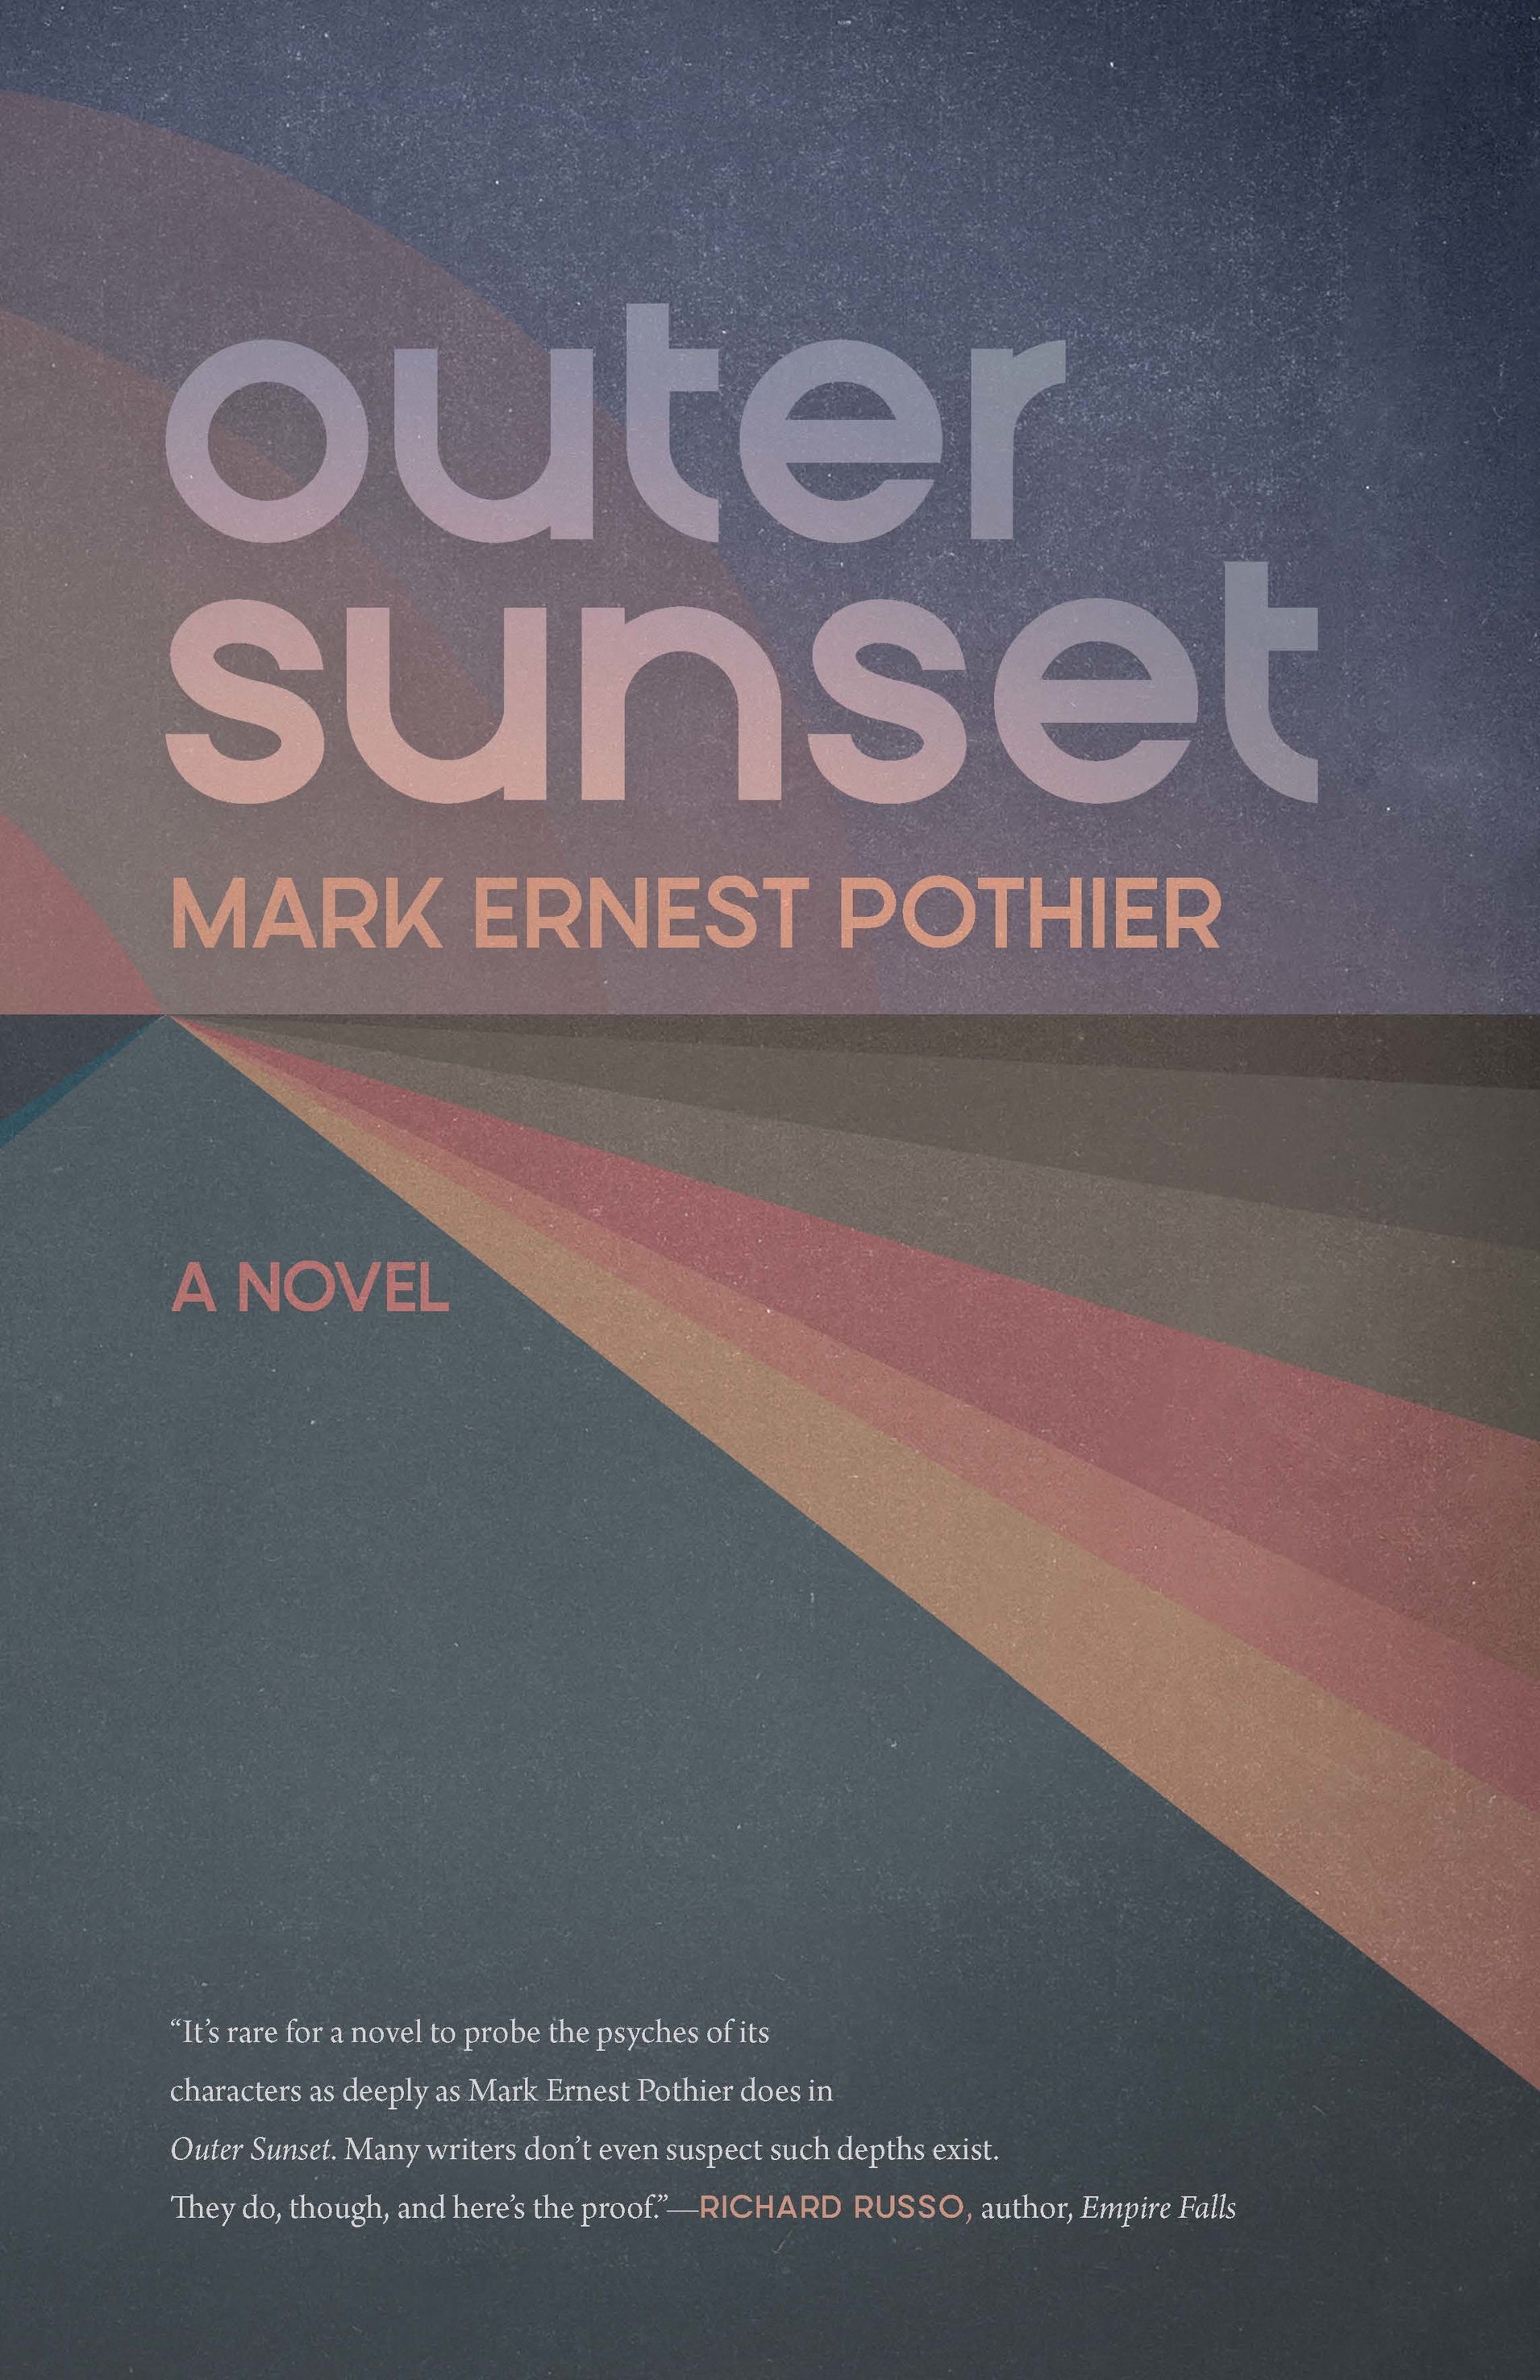 Book cover: Outer Sunset, a novel